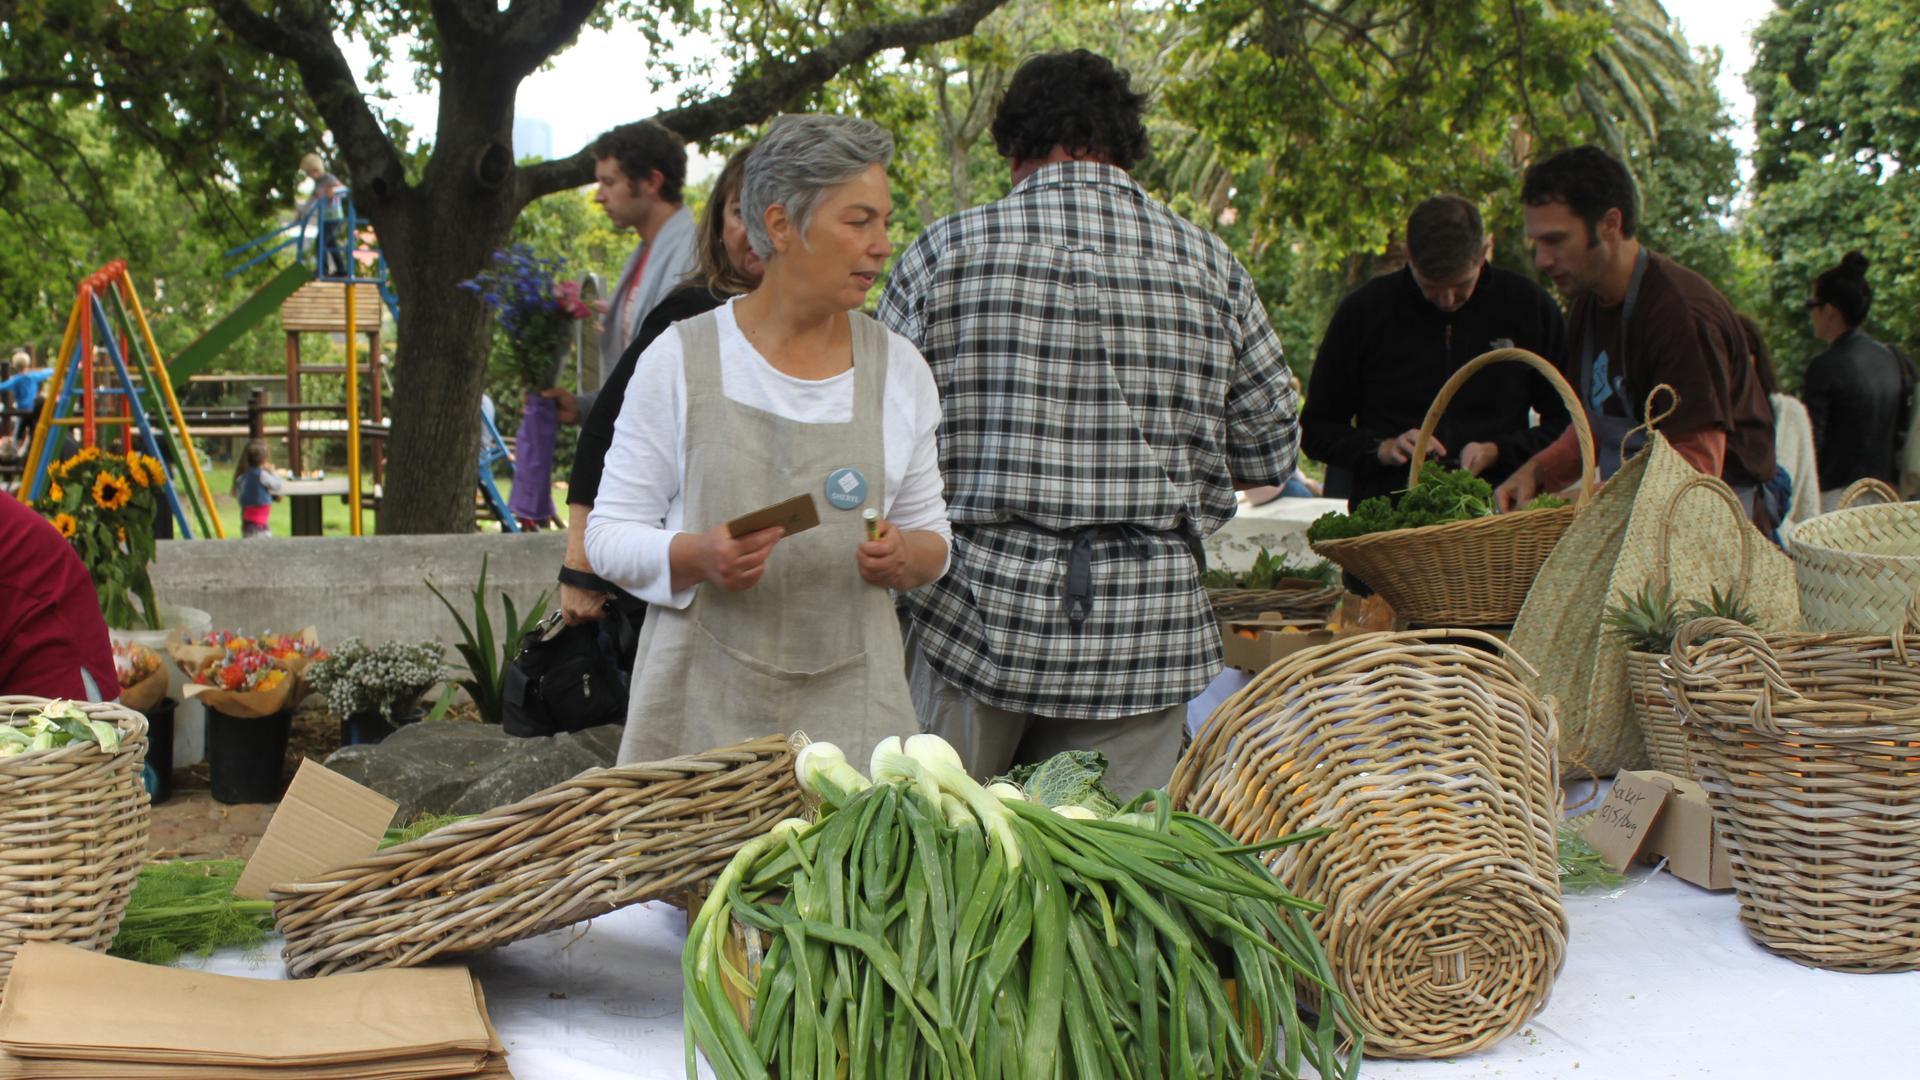 Sheryl Ozinsky, one of the founders of the Oranjezicht City Farm in Cape Town, selling produce at the Saturday market.